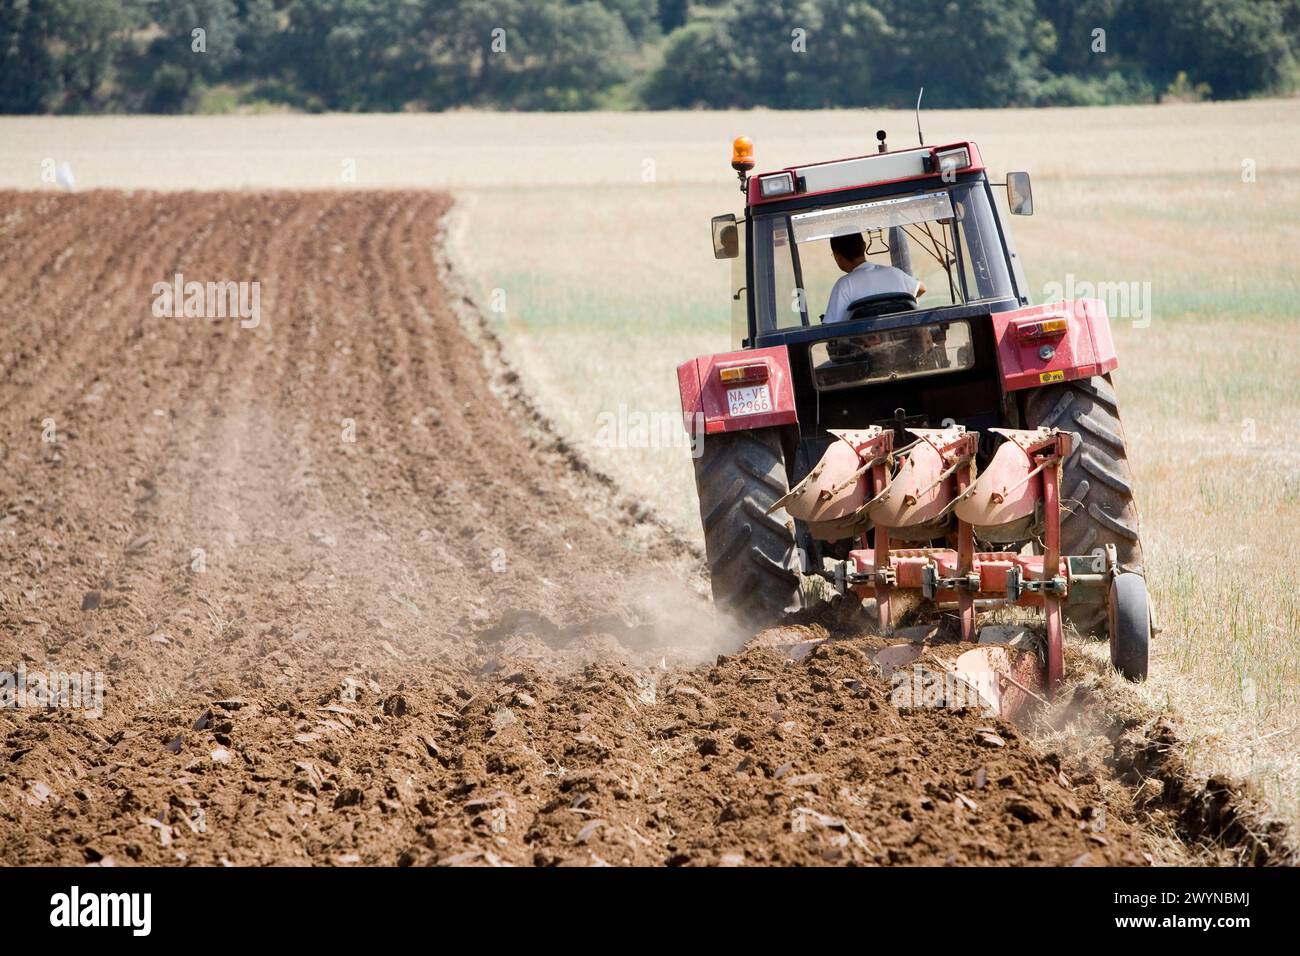 Agricultural machinery. Tractor ploughing the land. Mouldboard plough. Harvesting of cereals, Oco (near Estella), Navarre, Spain. Stock Photo